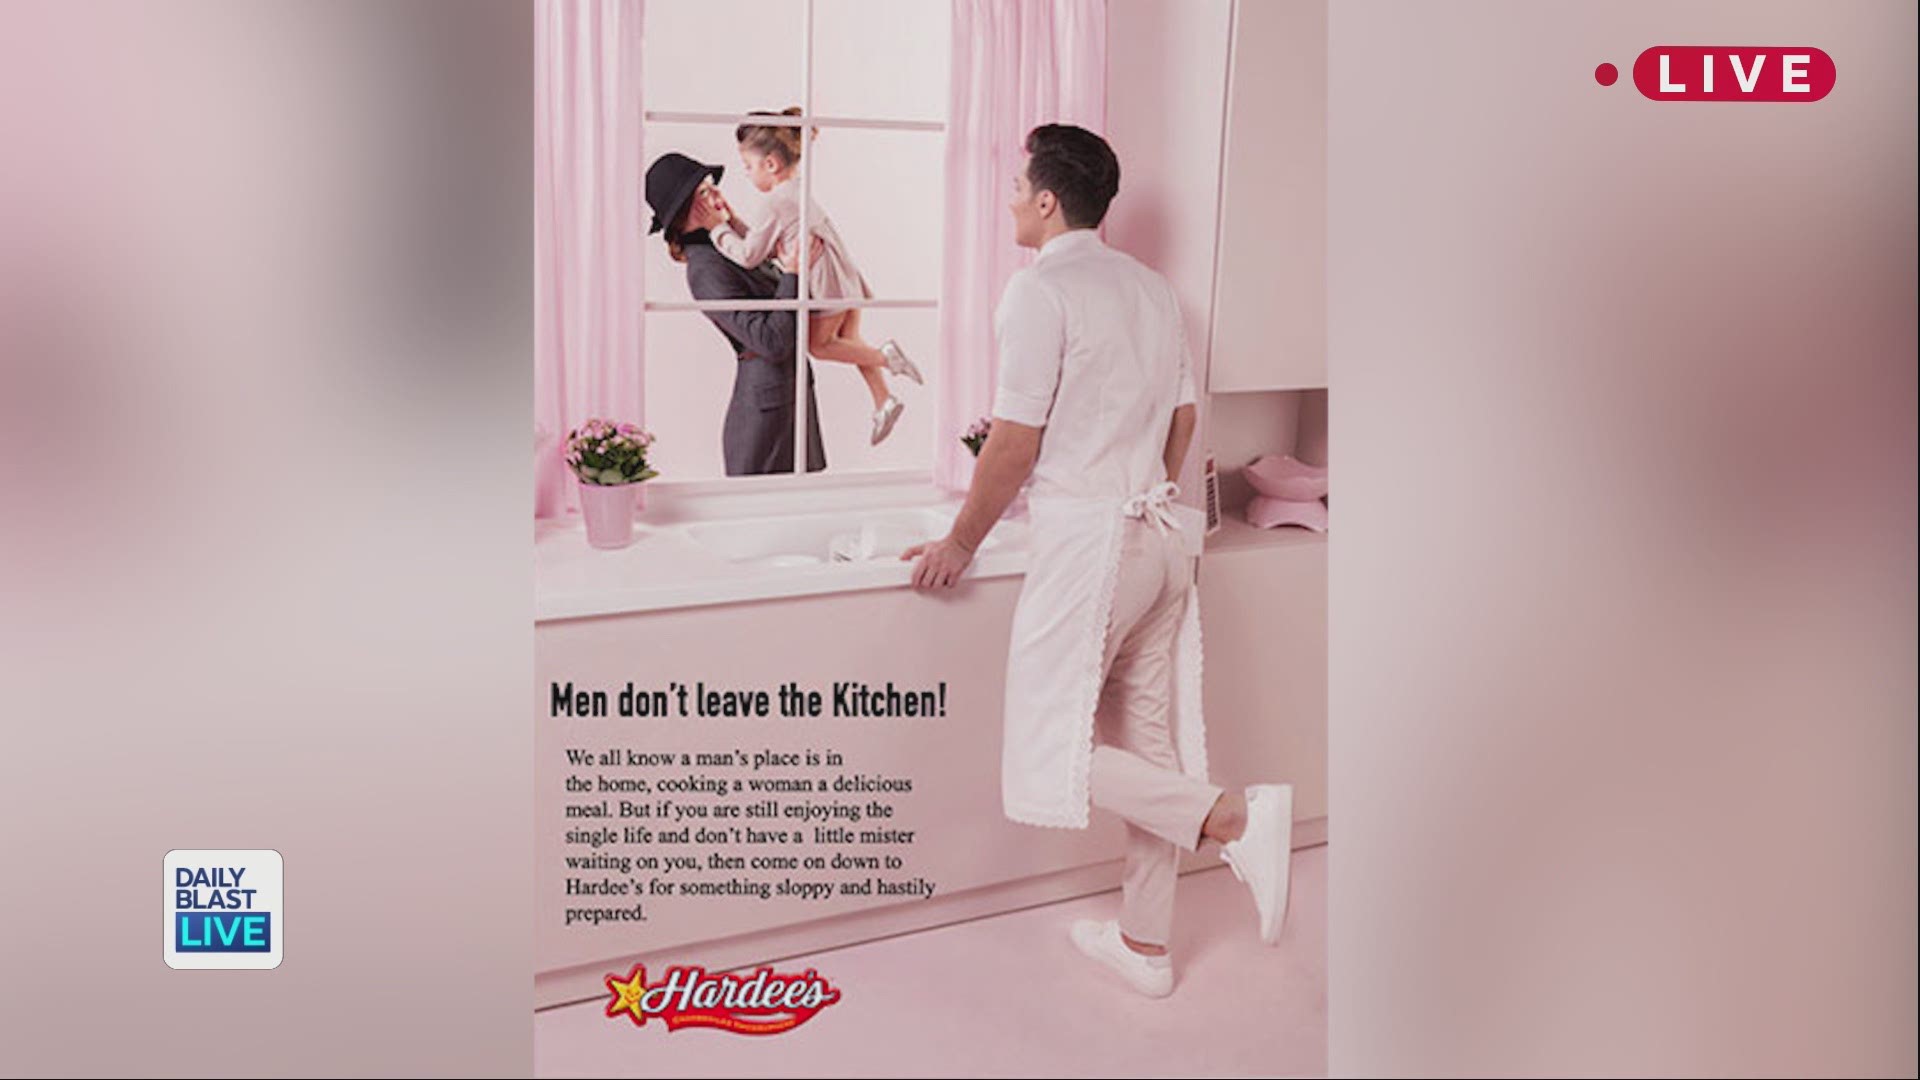 Gender roles are changing. They are a far cry from the 1950's housewives. One artist has re-imagined some vintage advertisements to reverse their sexist slant. Check out the originals versus the new takes on the vintage ads. 